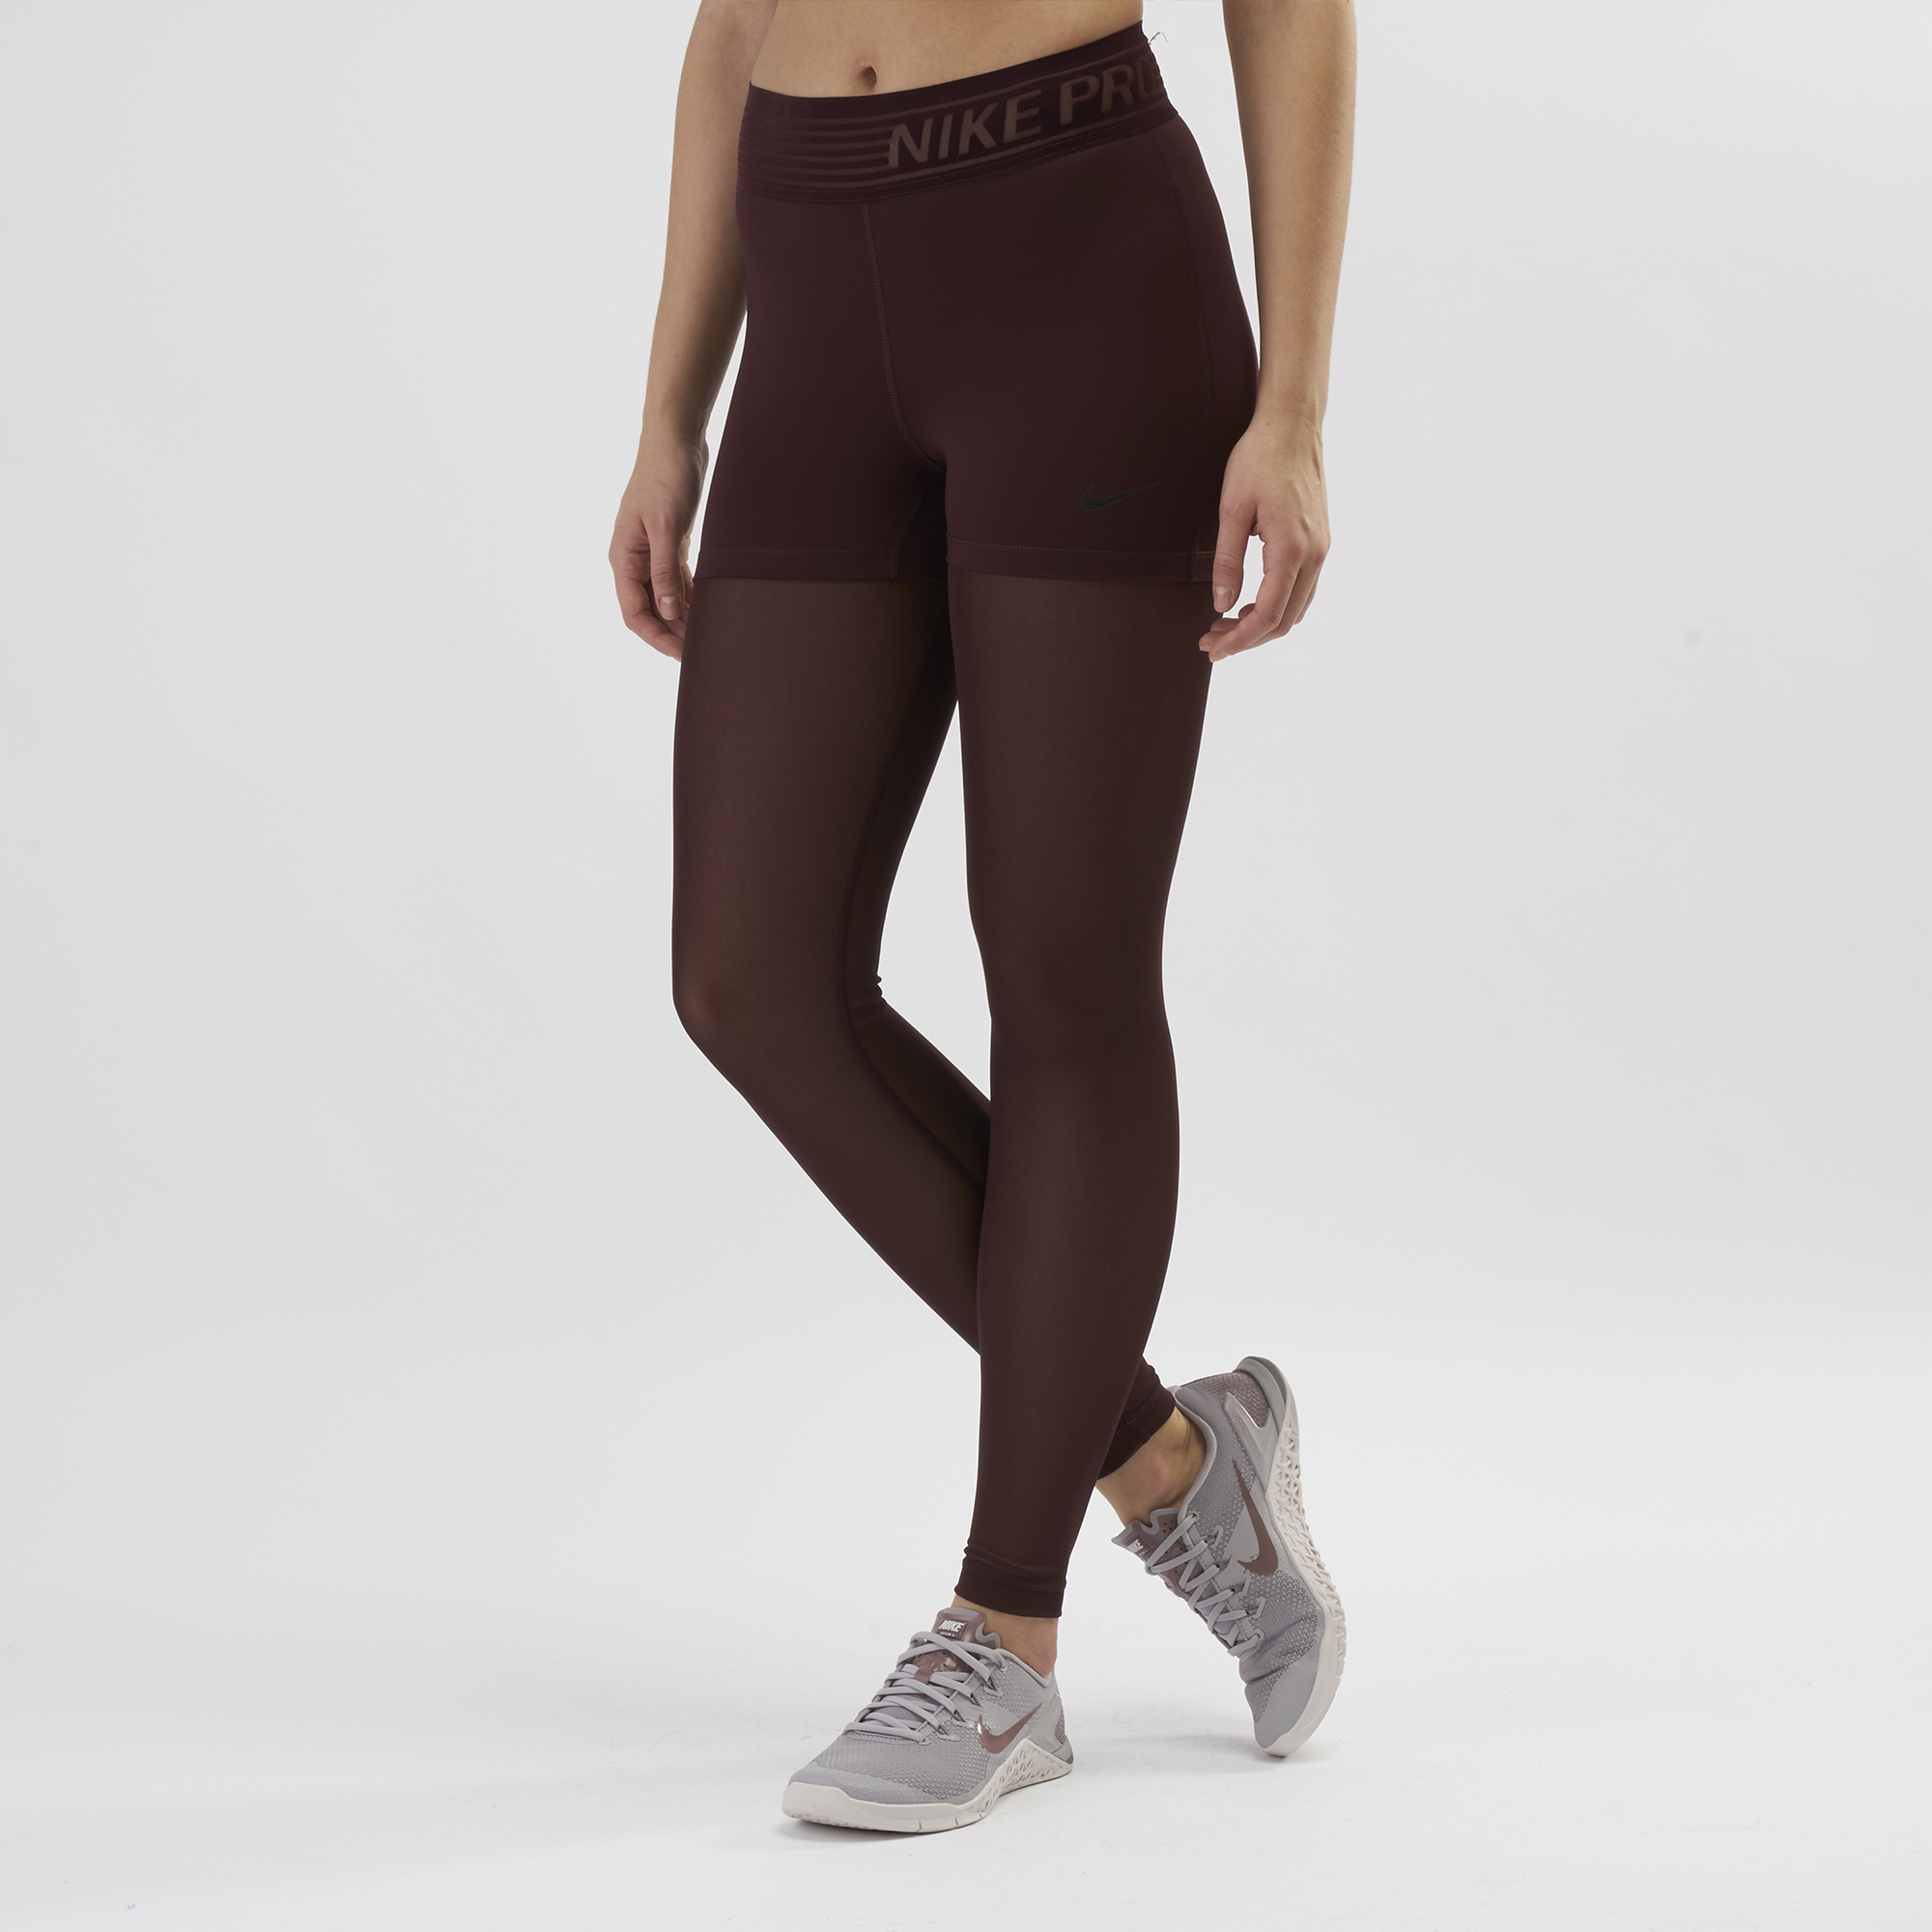 nike pro deluxe tights